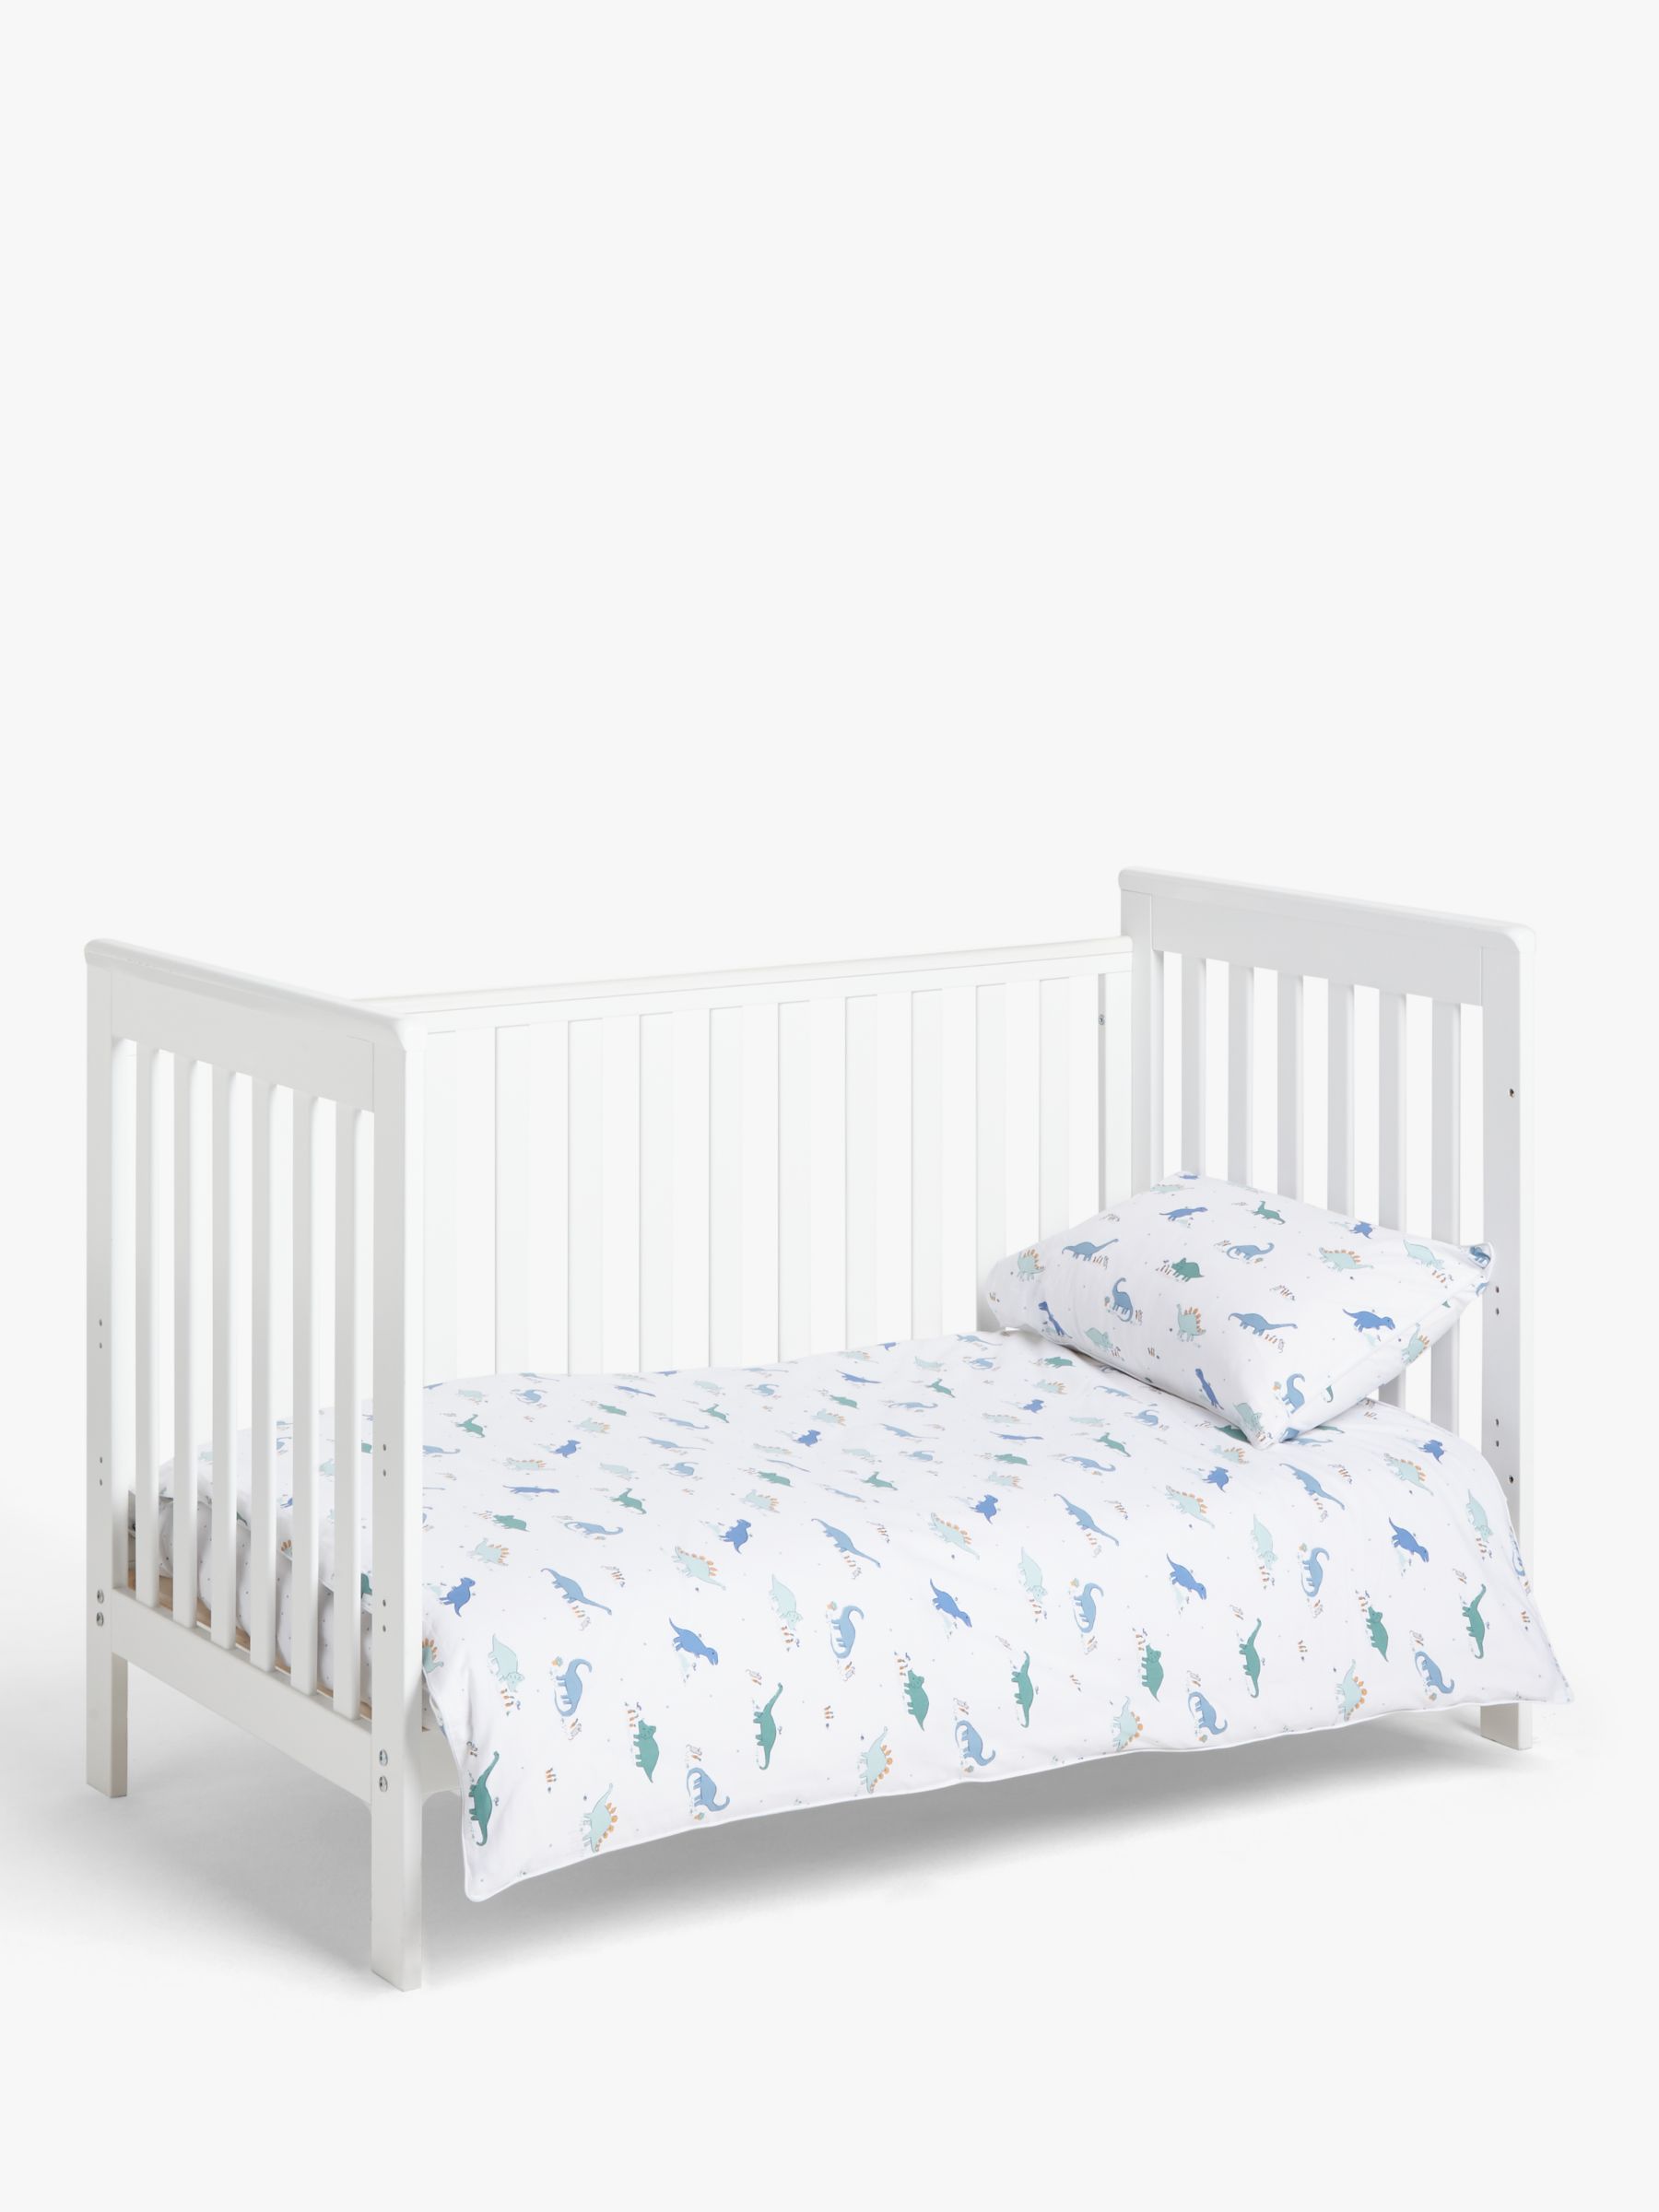 cot bed duvet cover and pillowcase